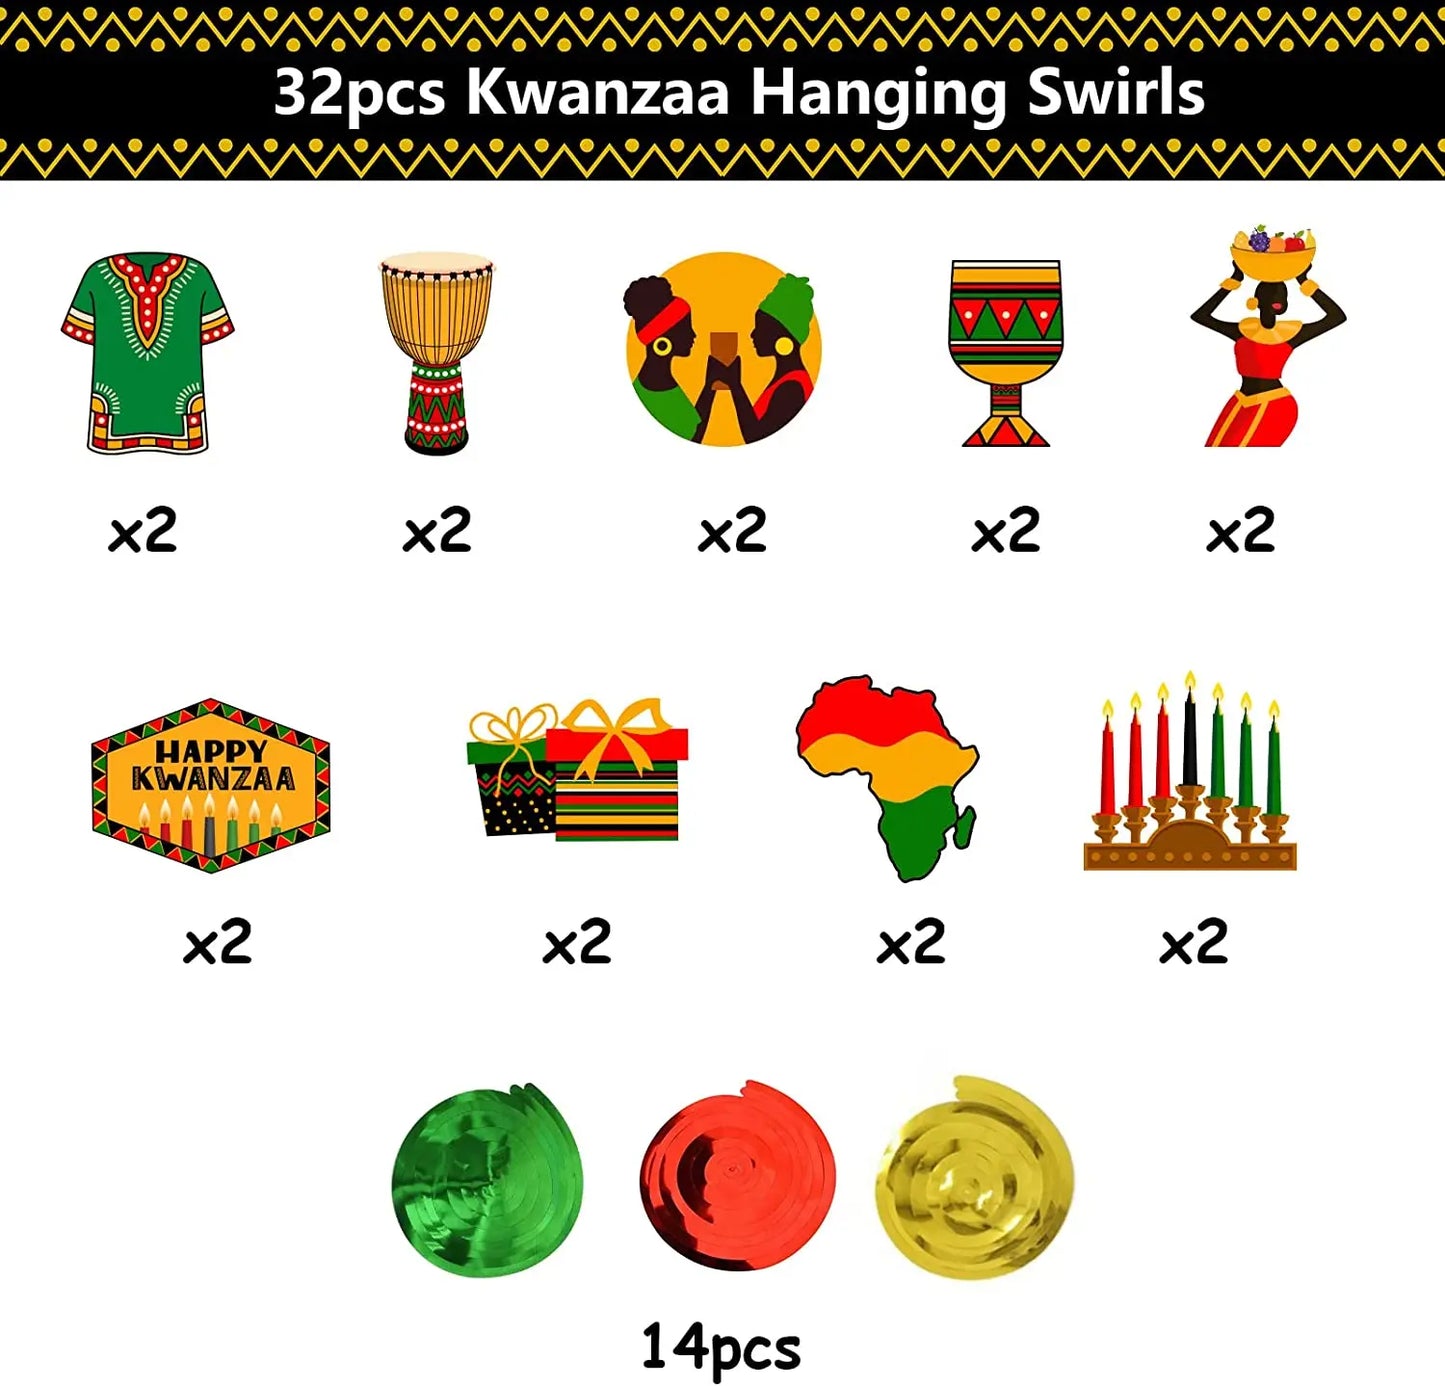 Happy Kwanzaa-African Heritage Holiday Decorations, Party Supplies, Hang Swirls, Celebration for Mantel, Fireplace Decor